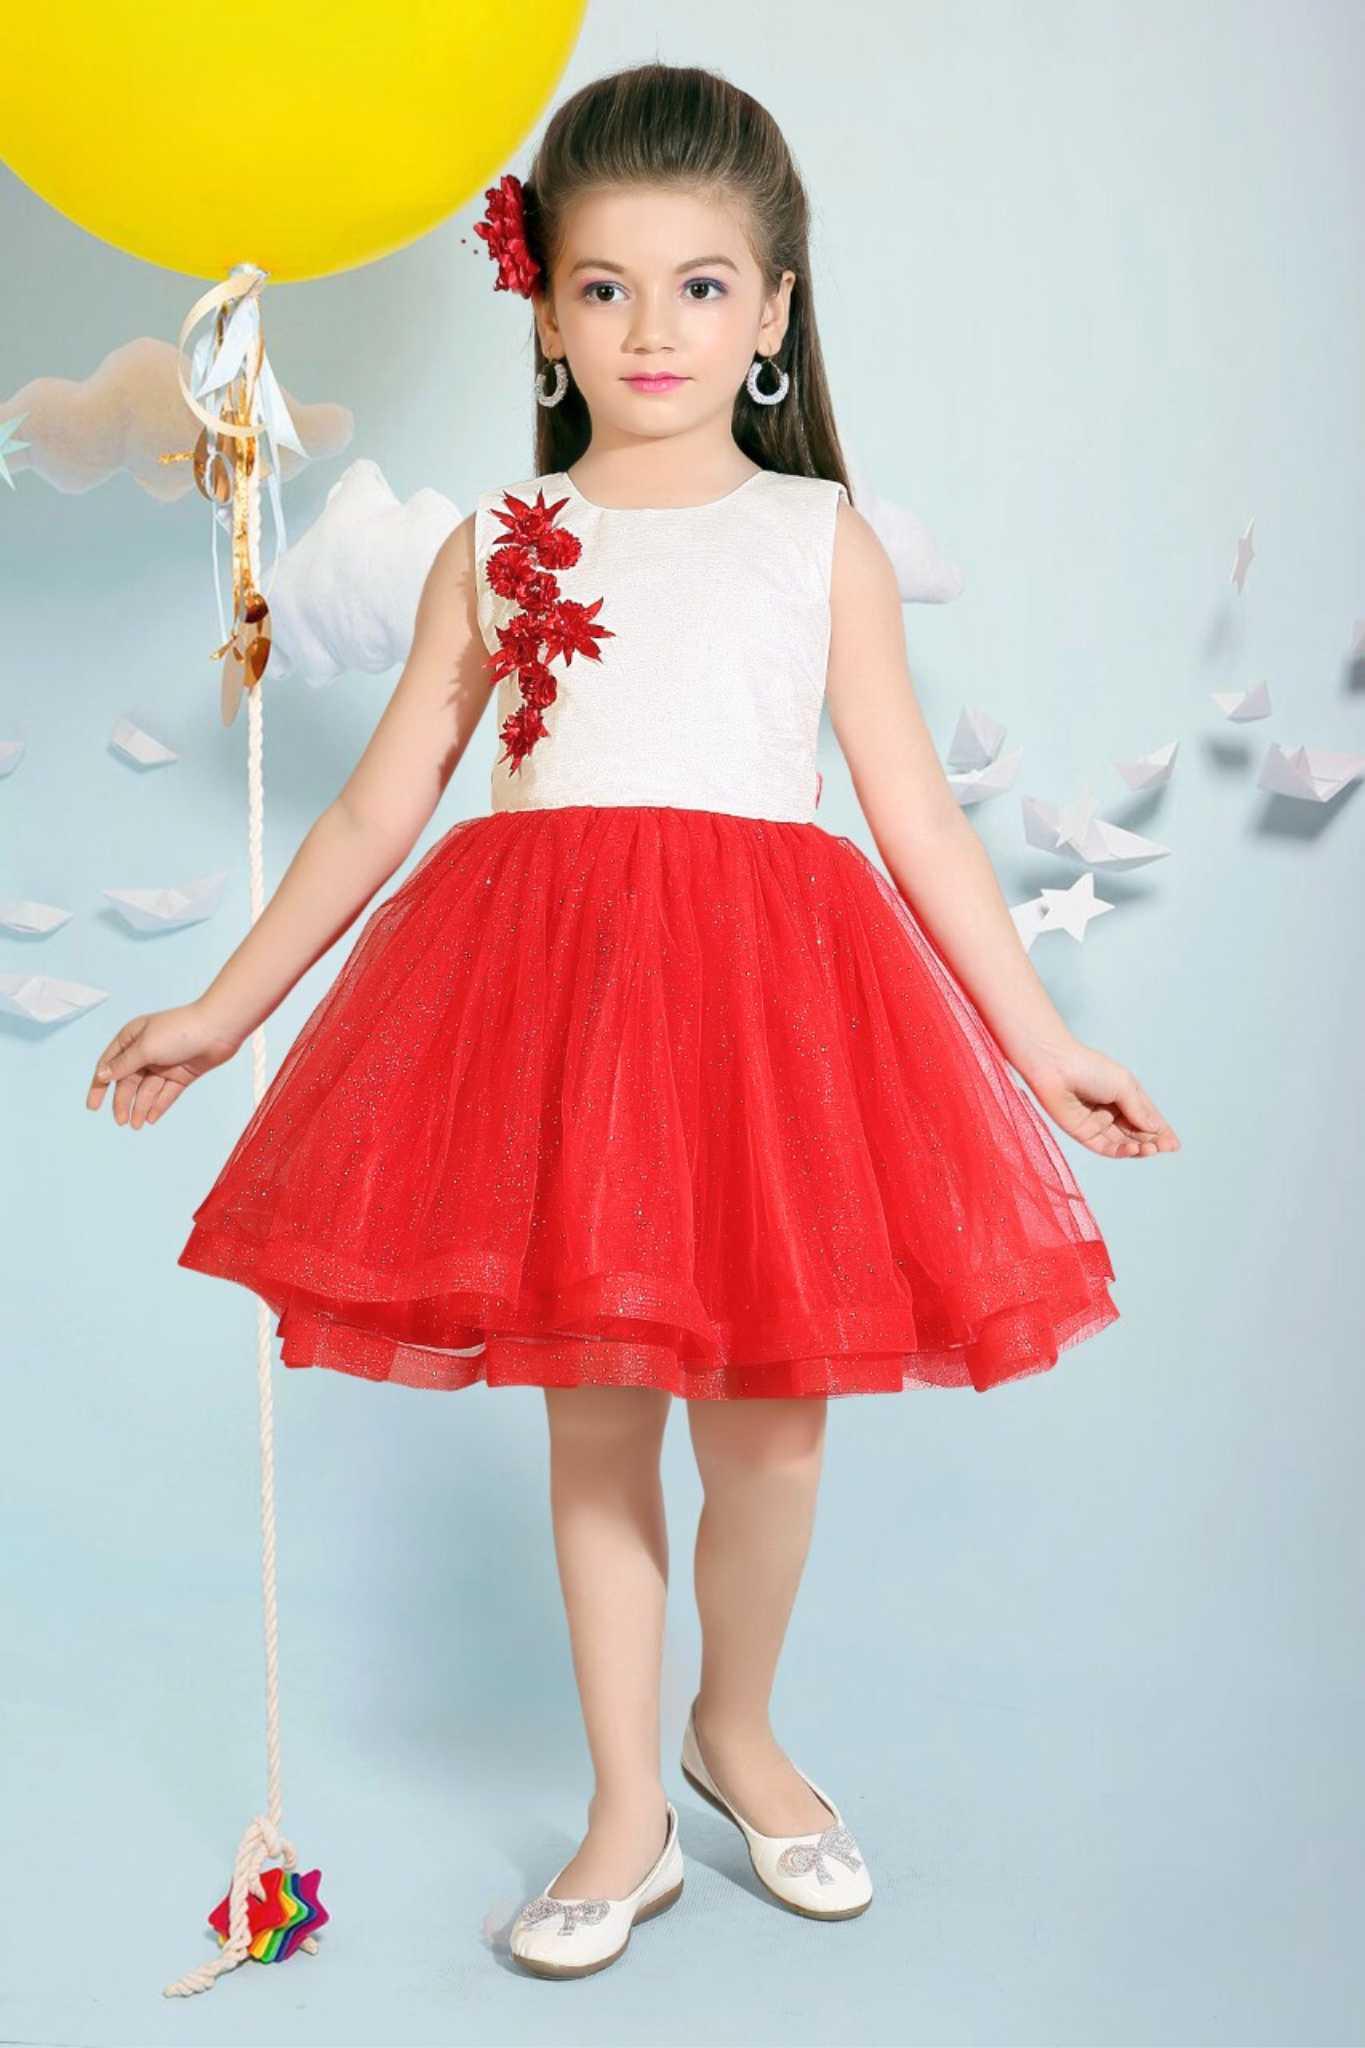 White And Red Floral Net Frock With Floral Embellishments For Girls - Lagorii Kids